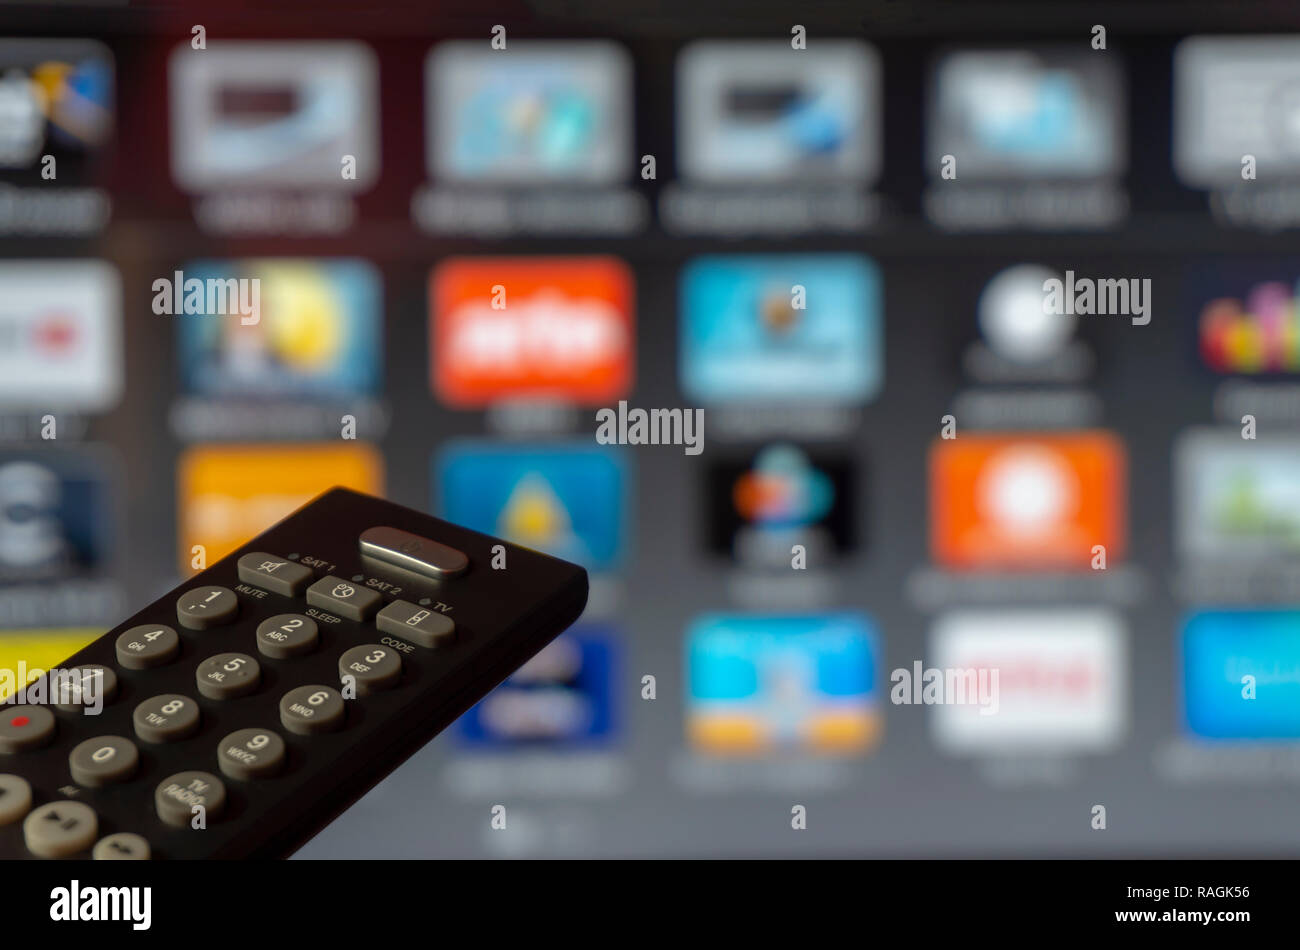 Smart television screen with close up tv remote control in foreground Stock Photo